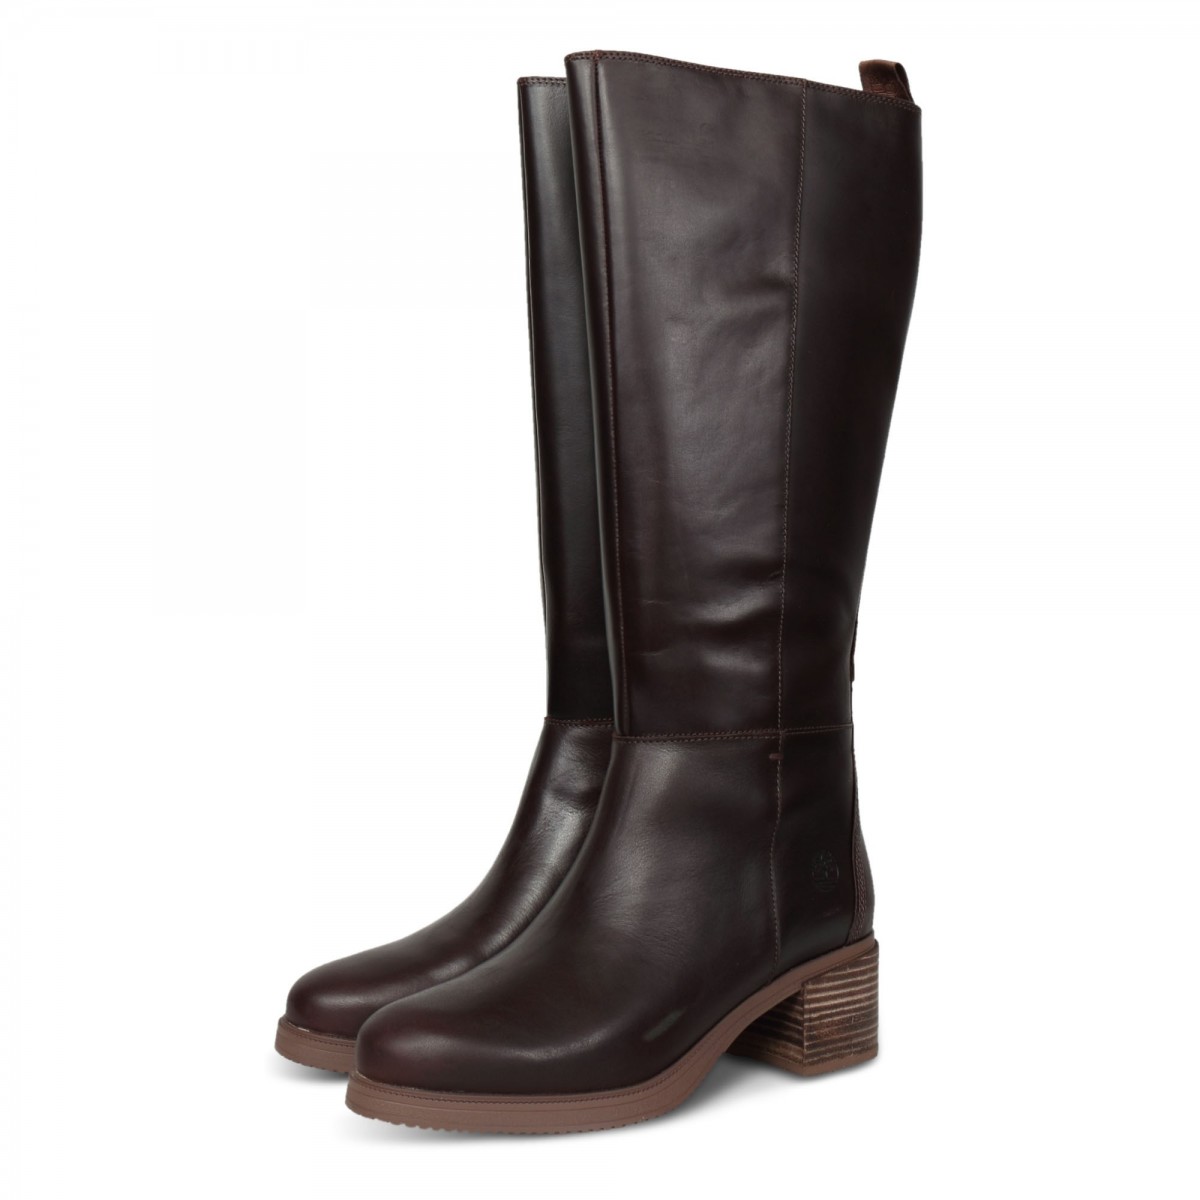 DALSTON VIBE TALL BOOT